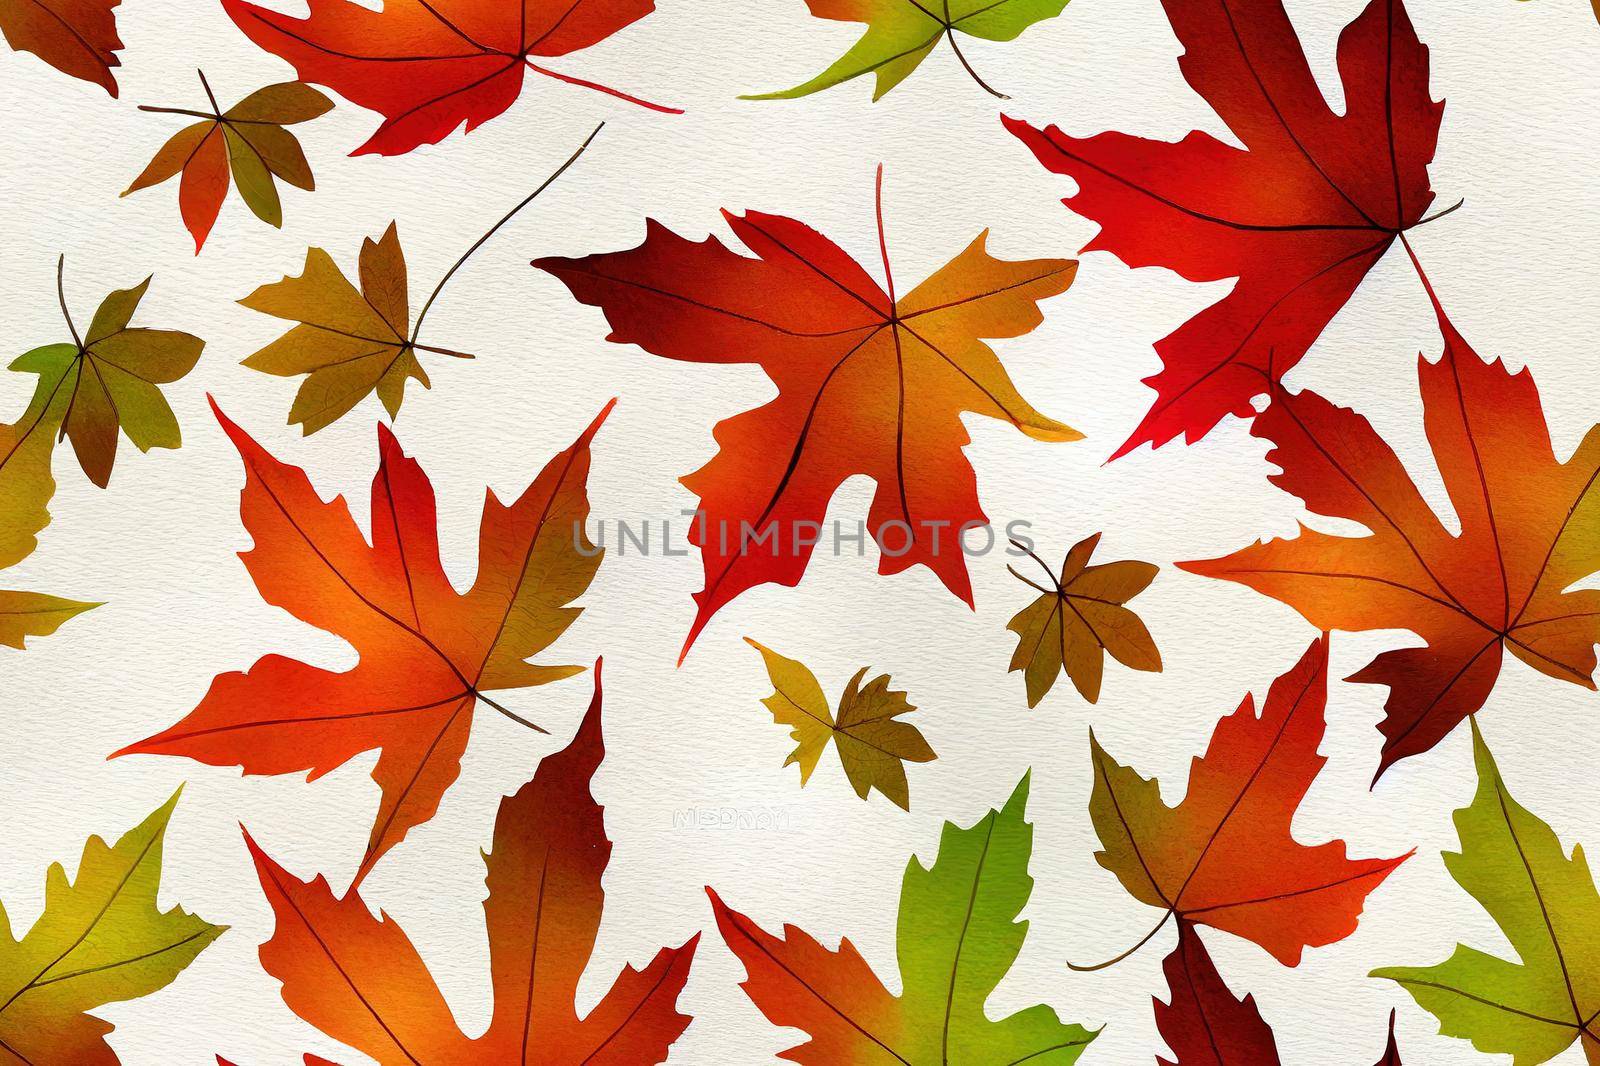 Maple leaves on white background, seamless watercolor pattern of autumn colorful leaves, floral illustration.